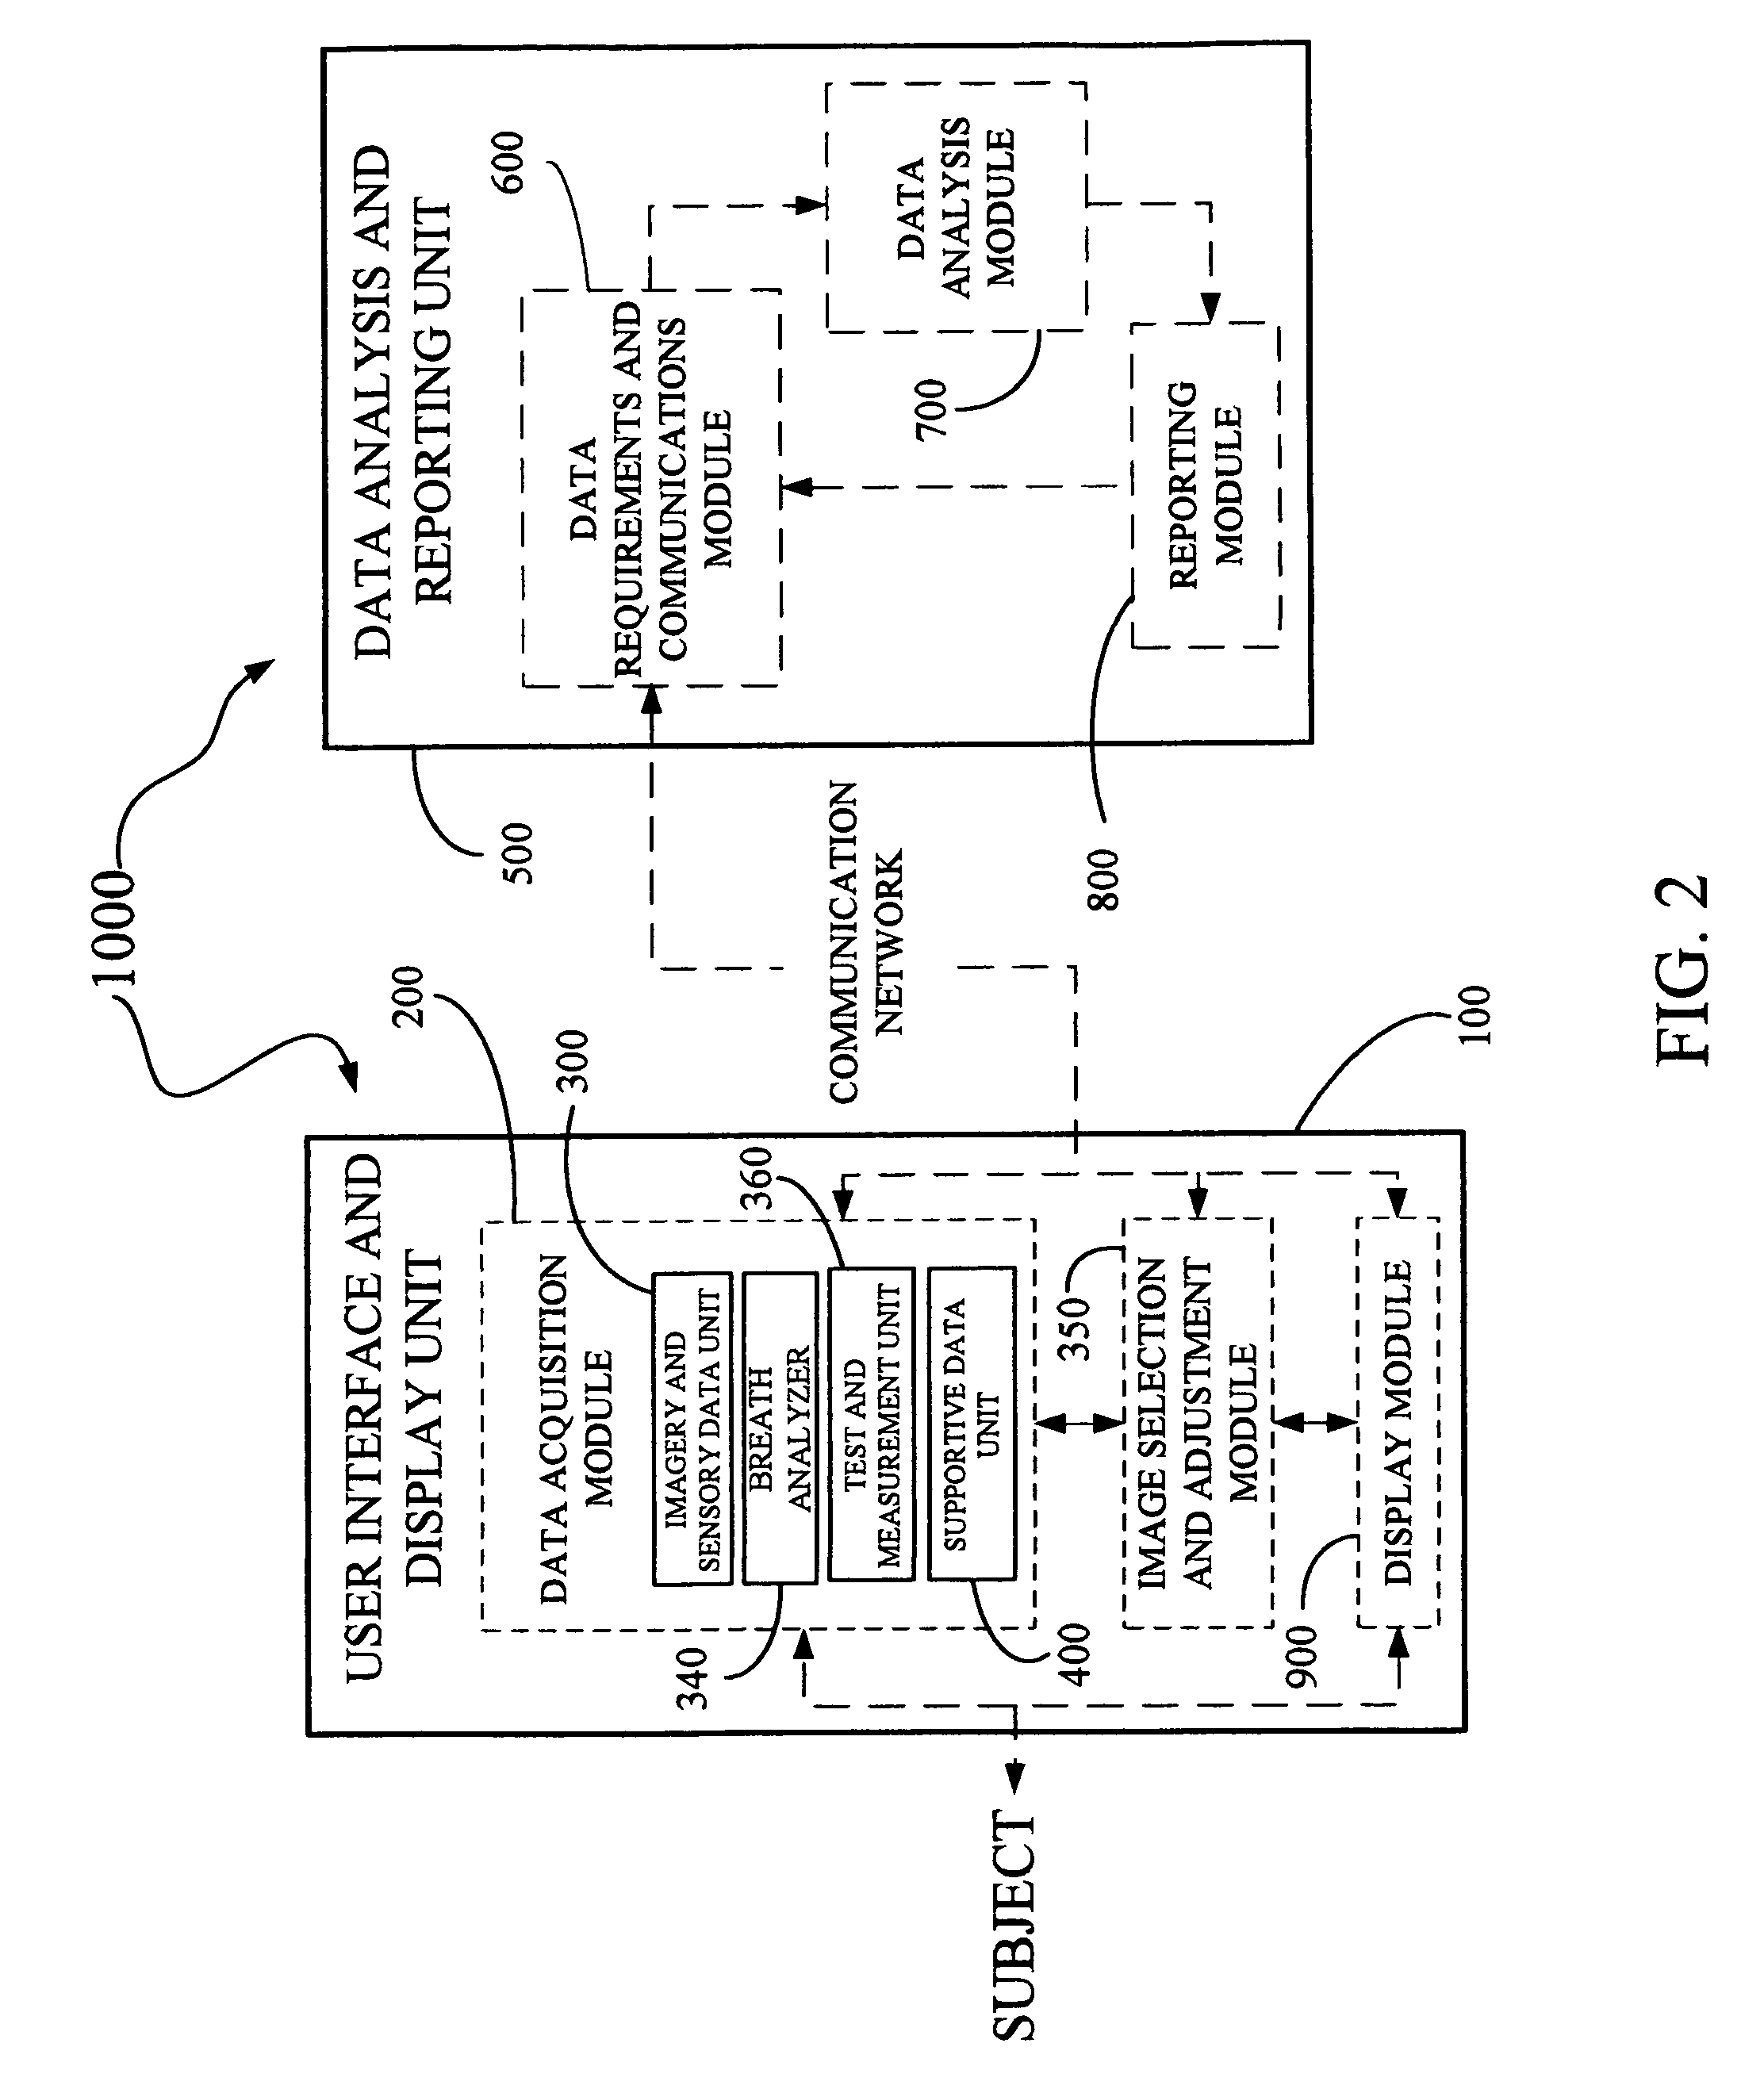 Derma diagnostic and automated data analysis system